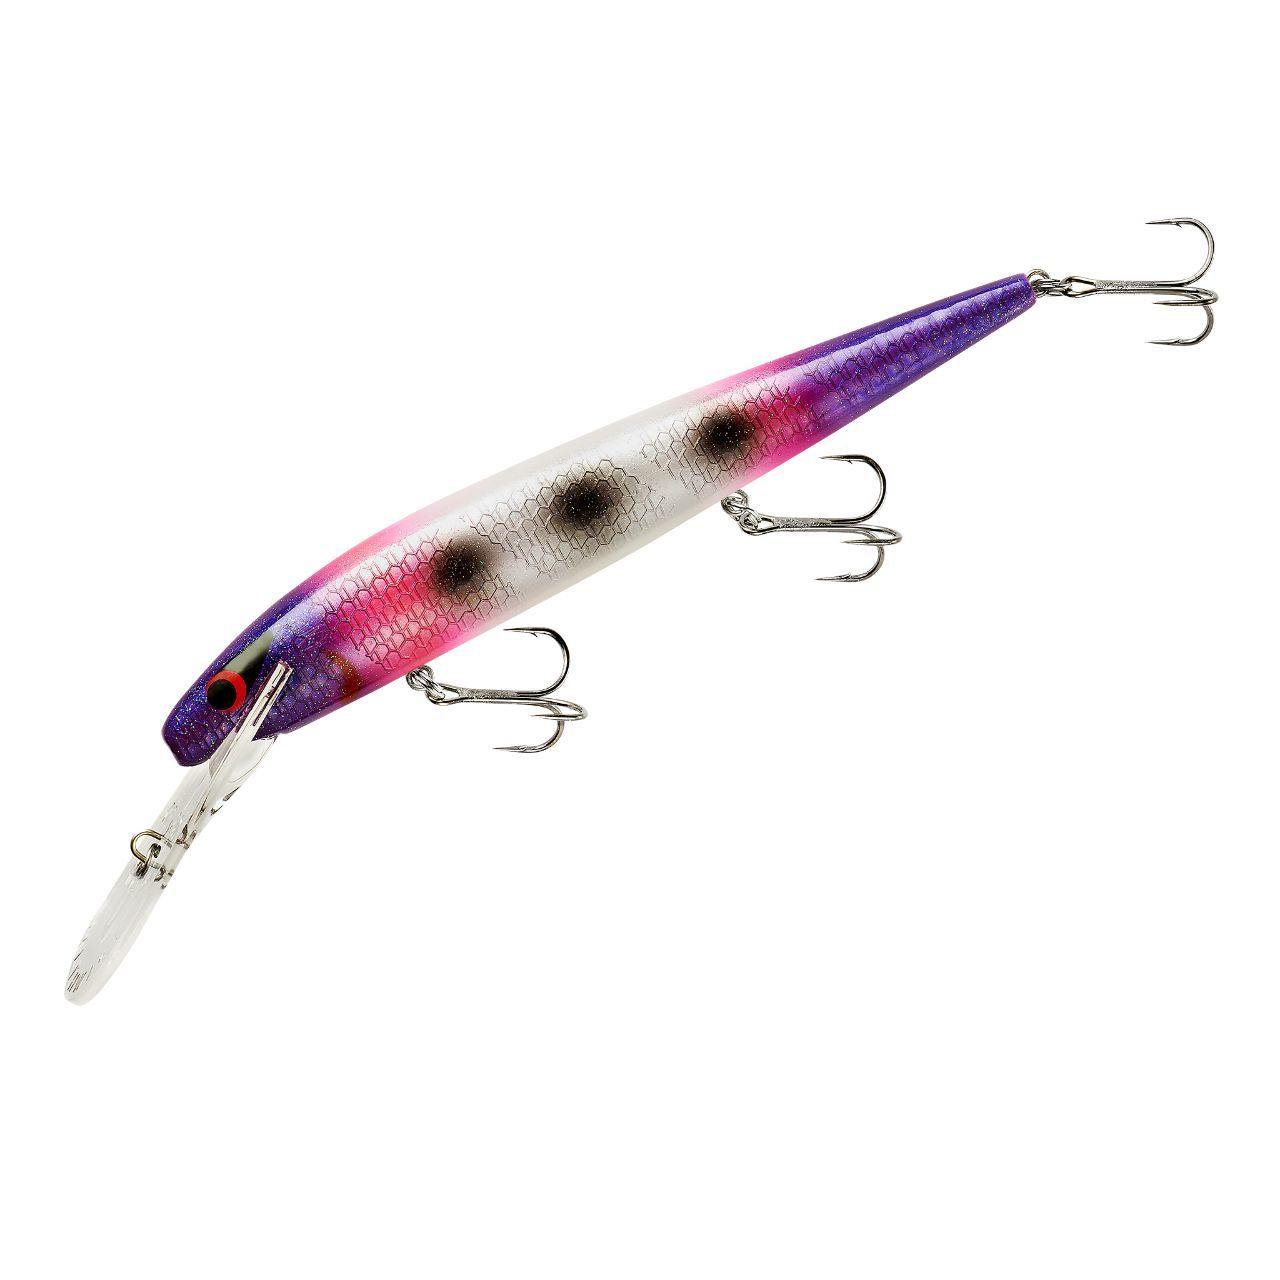 Smithwick Top 20 Rogue – Natural Sports - The Fishing Store